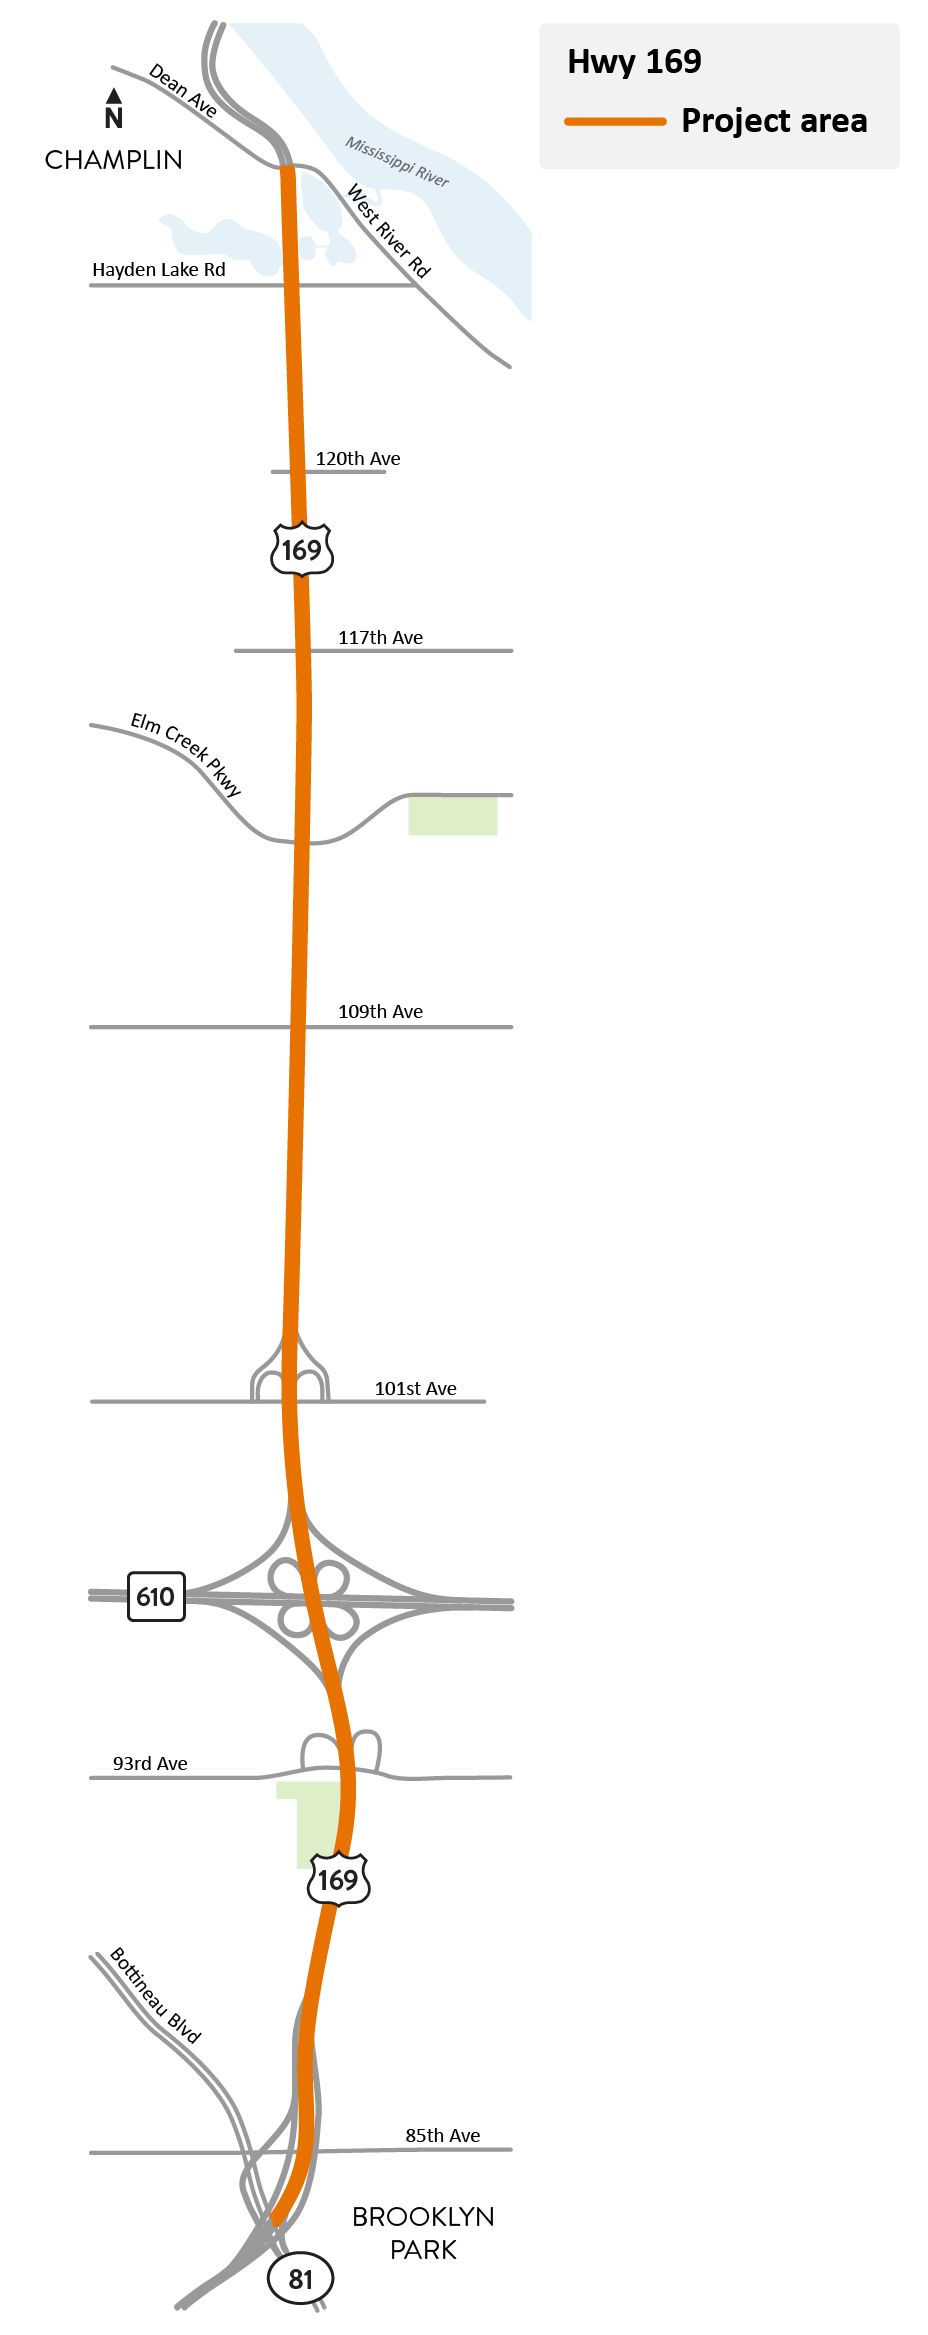 Highway 169 between Co. Rd. 81/Bottineau Blvd. in Brooklyn Park and West River Rd./Dean Ave. in Champlin project area map.